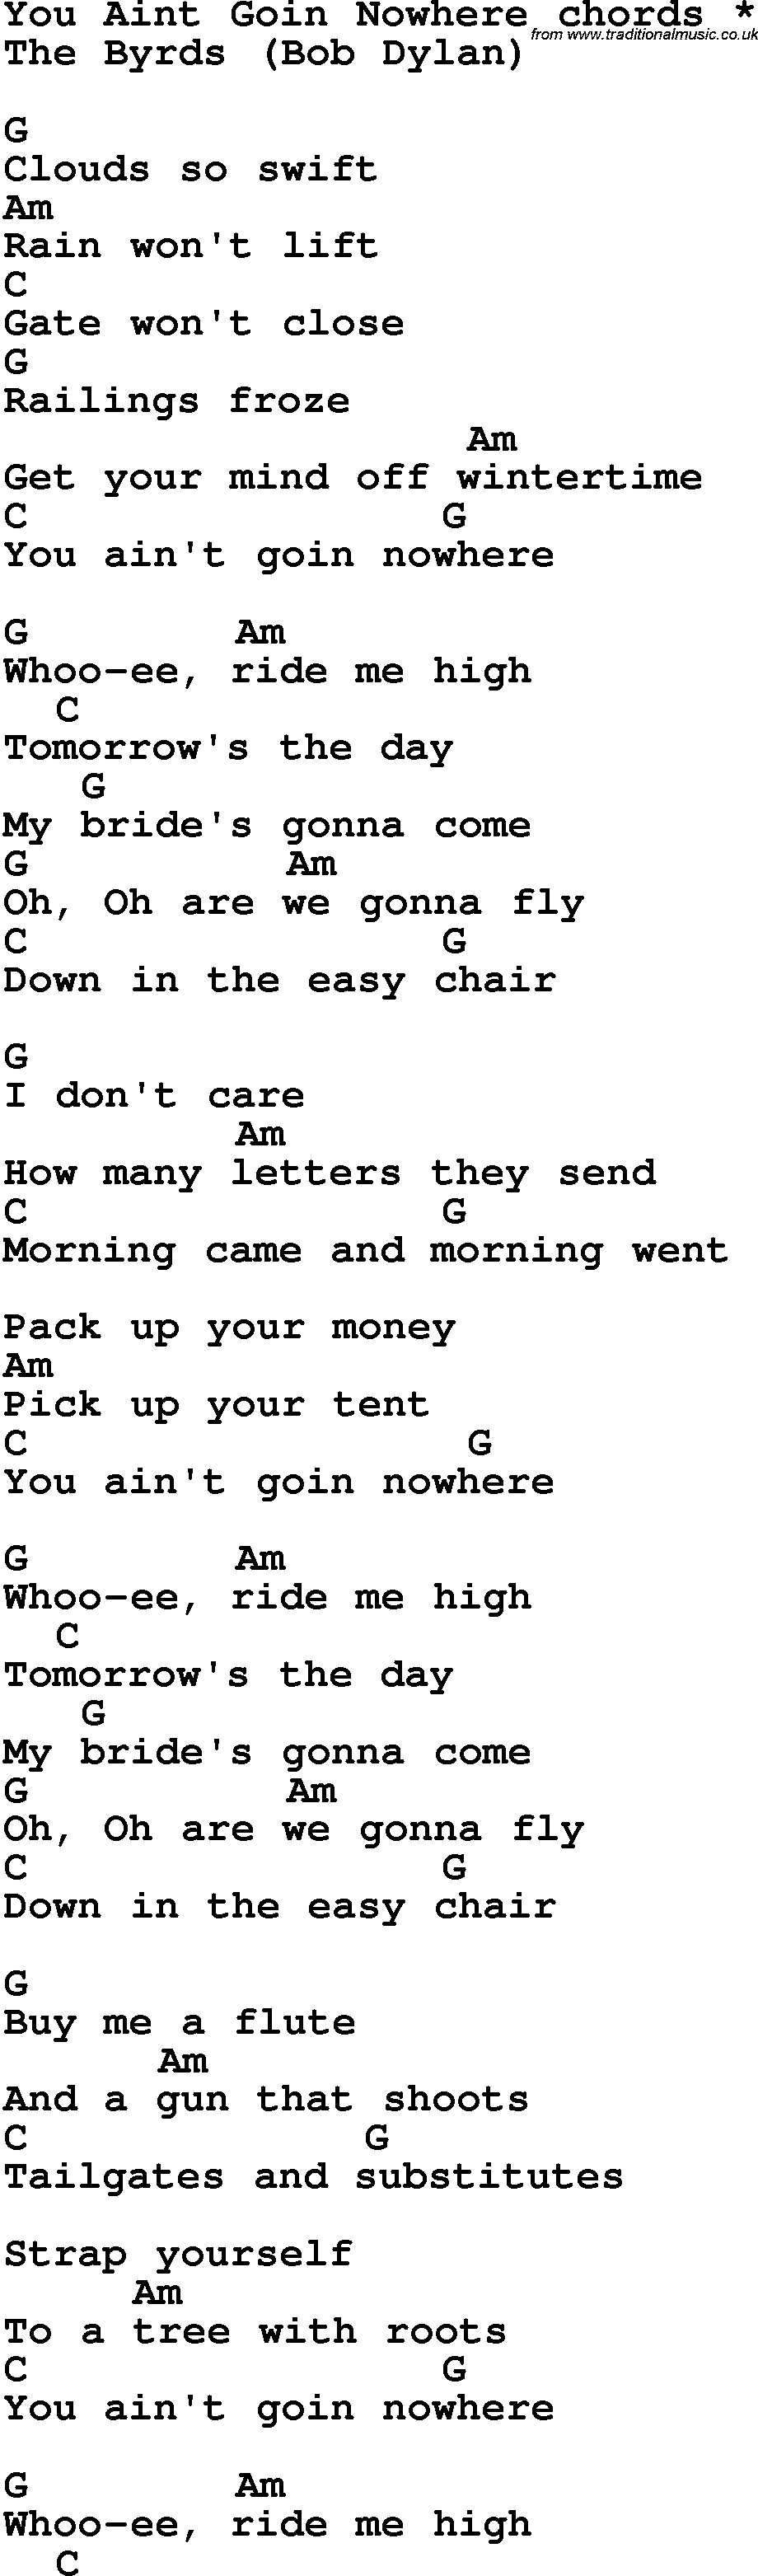 Song Lyrics with guitar chords for You Ain't Goin'nowhere